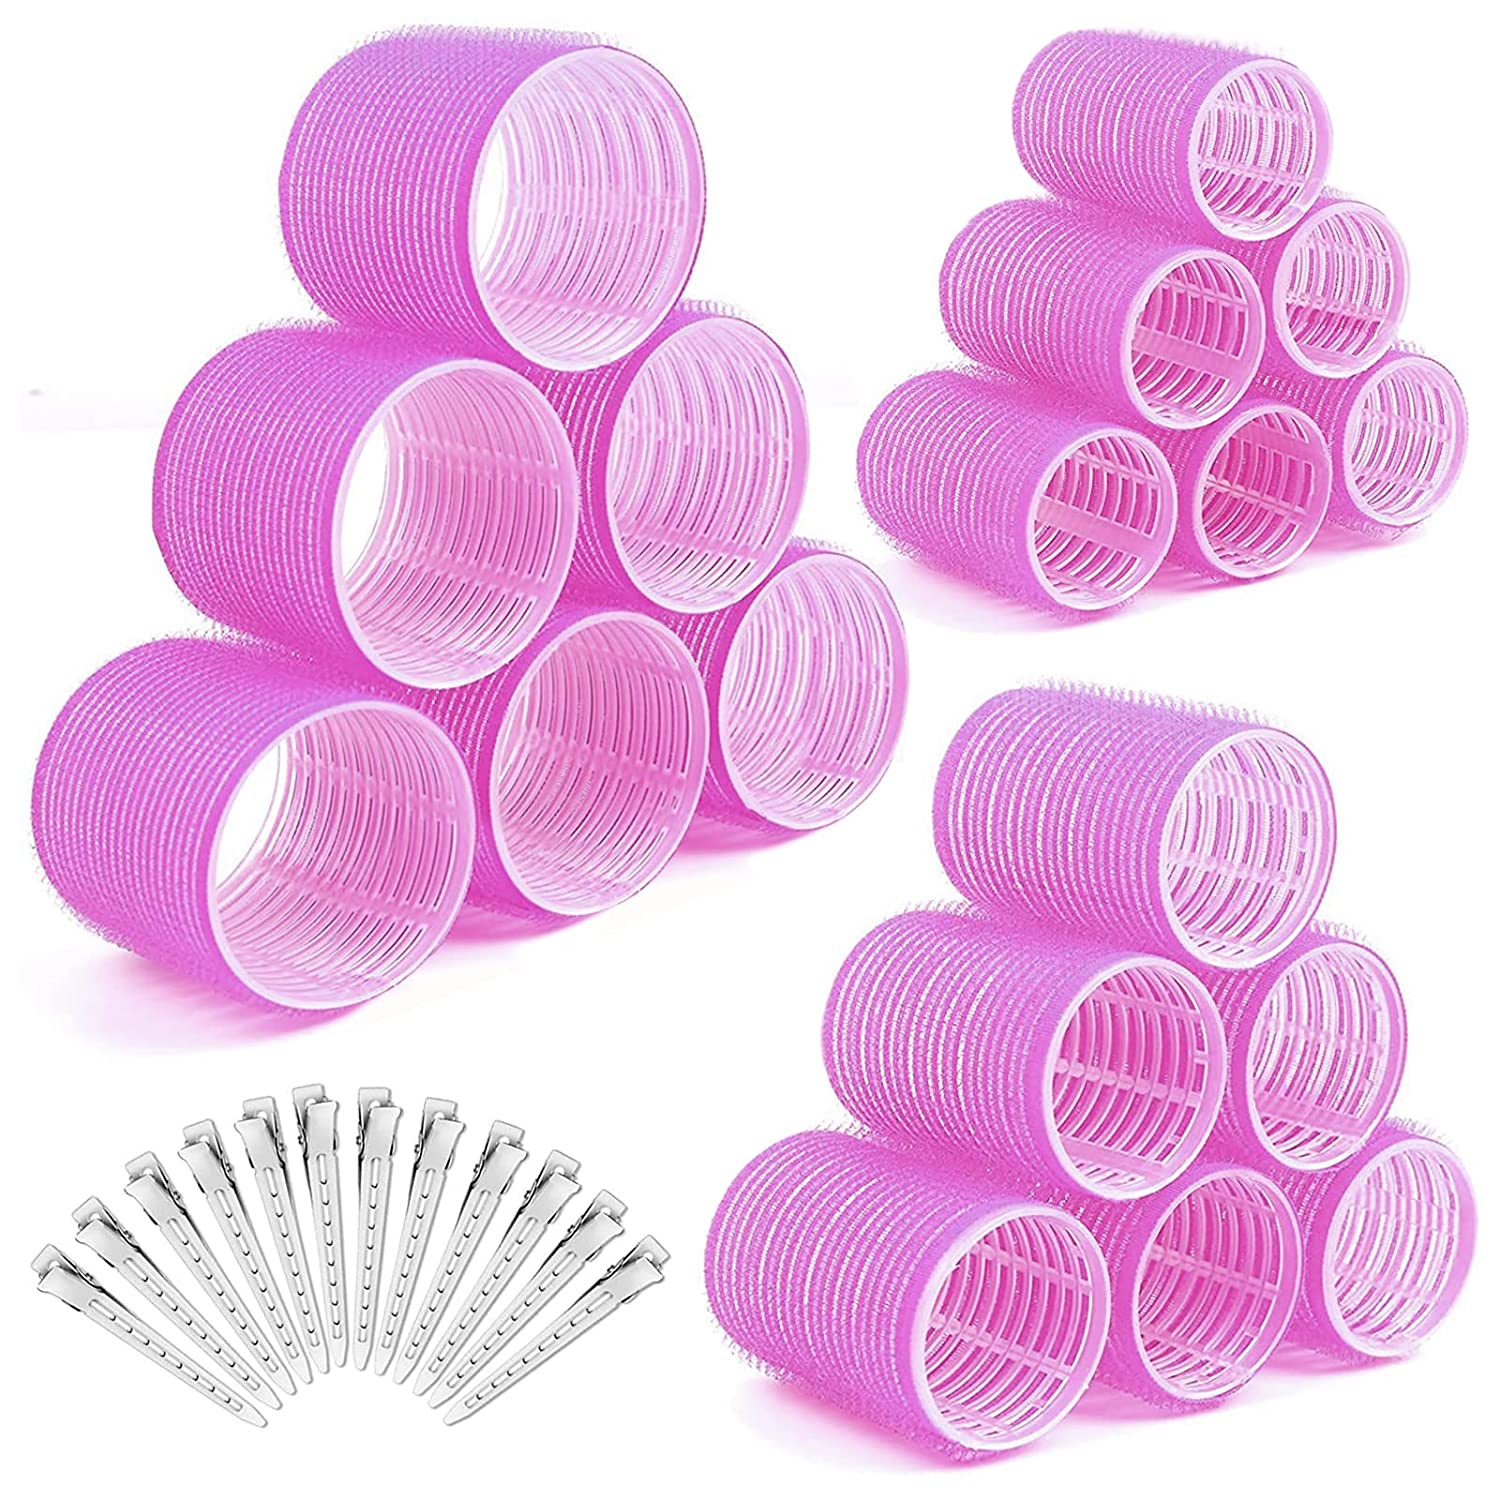 30 Piece Hair Rollers Set, Curlers Large Curls, Without Heat, Self-Adhesive Rollers With Hair Clips, Hair Rollers for Curls and Professional Hair Styling, Velcro Winder